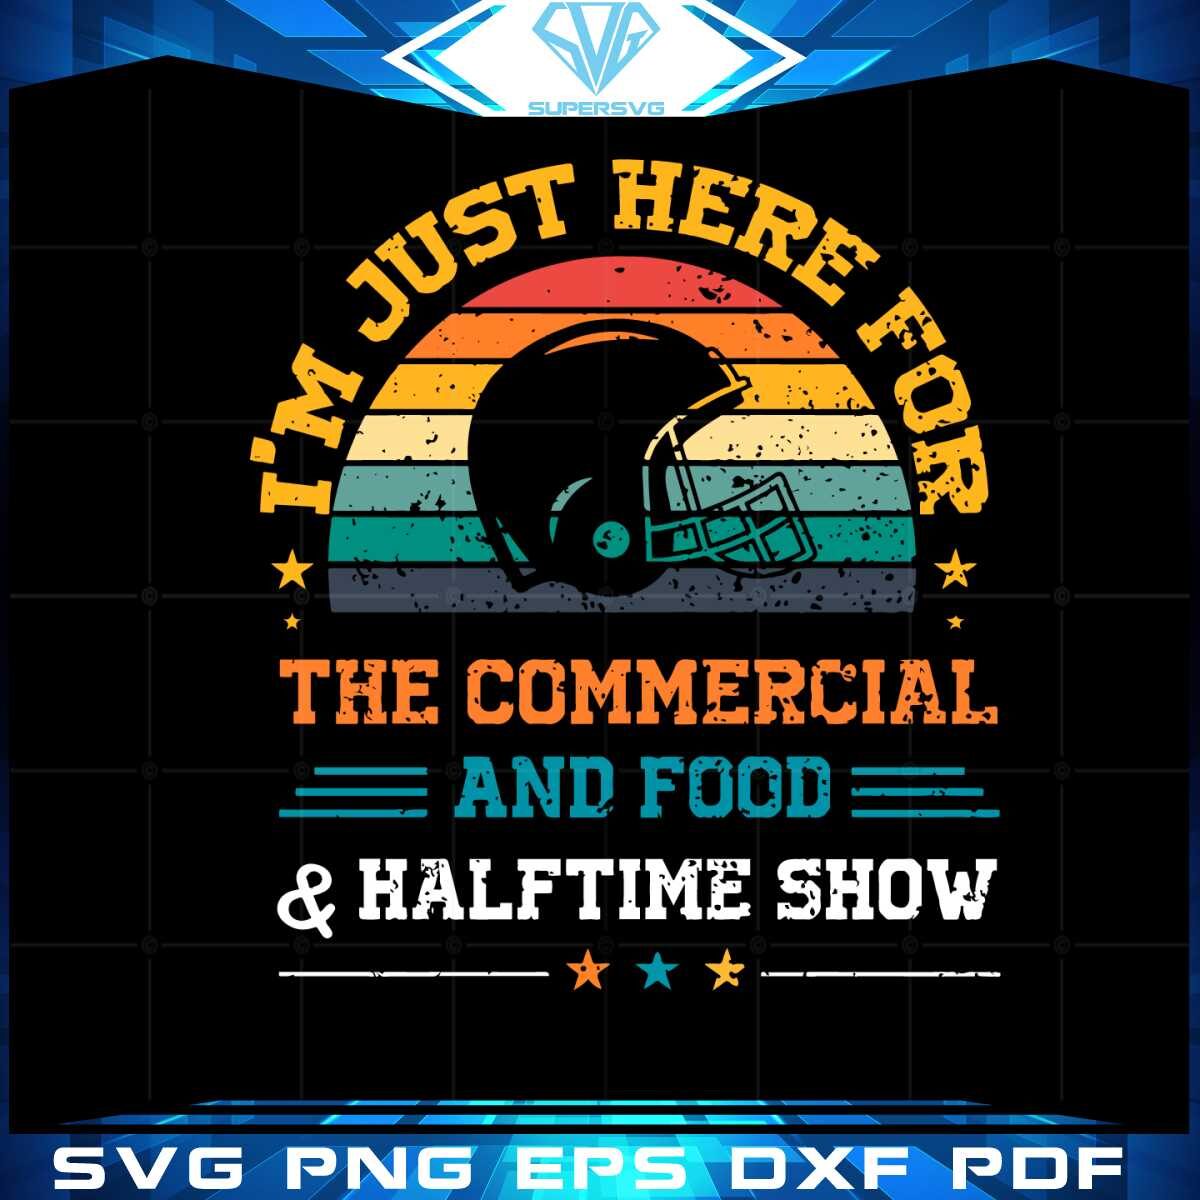 im-just-here-for-the-snacks-commercials-and-halftime-show-vintage-svg